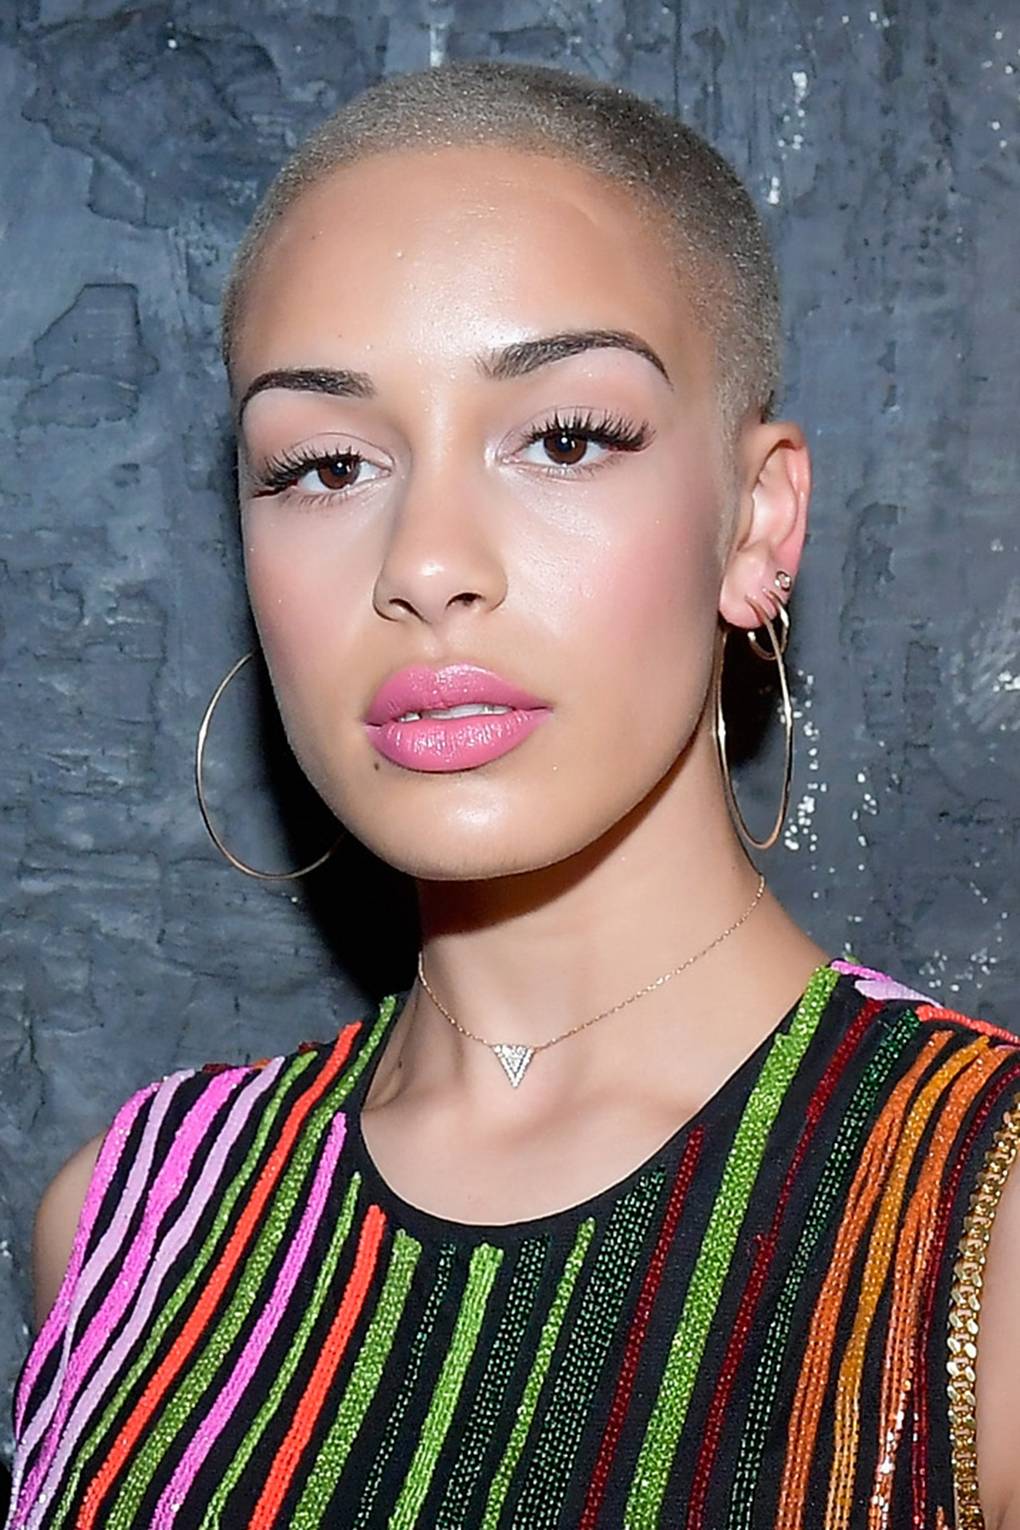 70+ Hot Pictures Of Jorja Smith Which Will Make Your Day 23